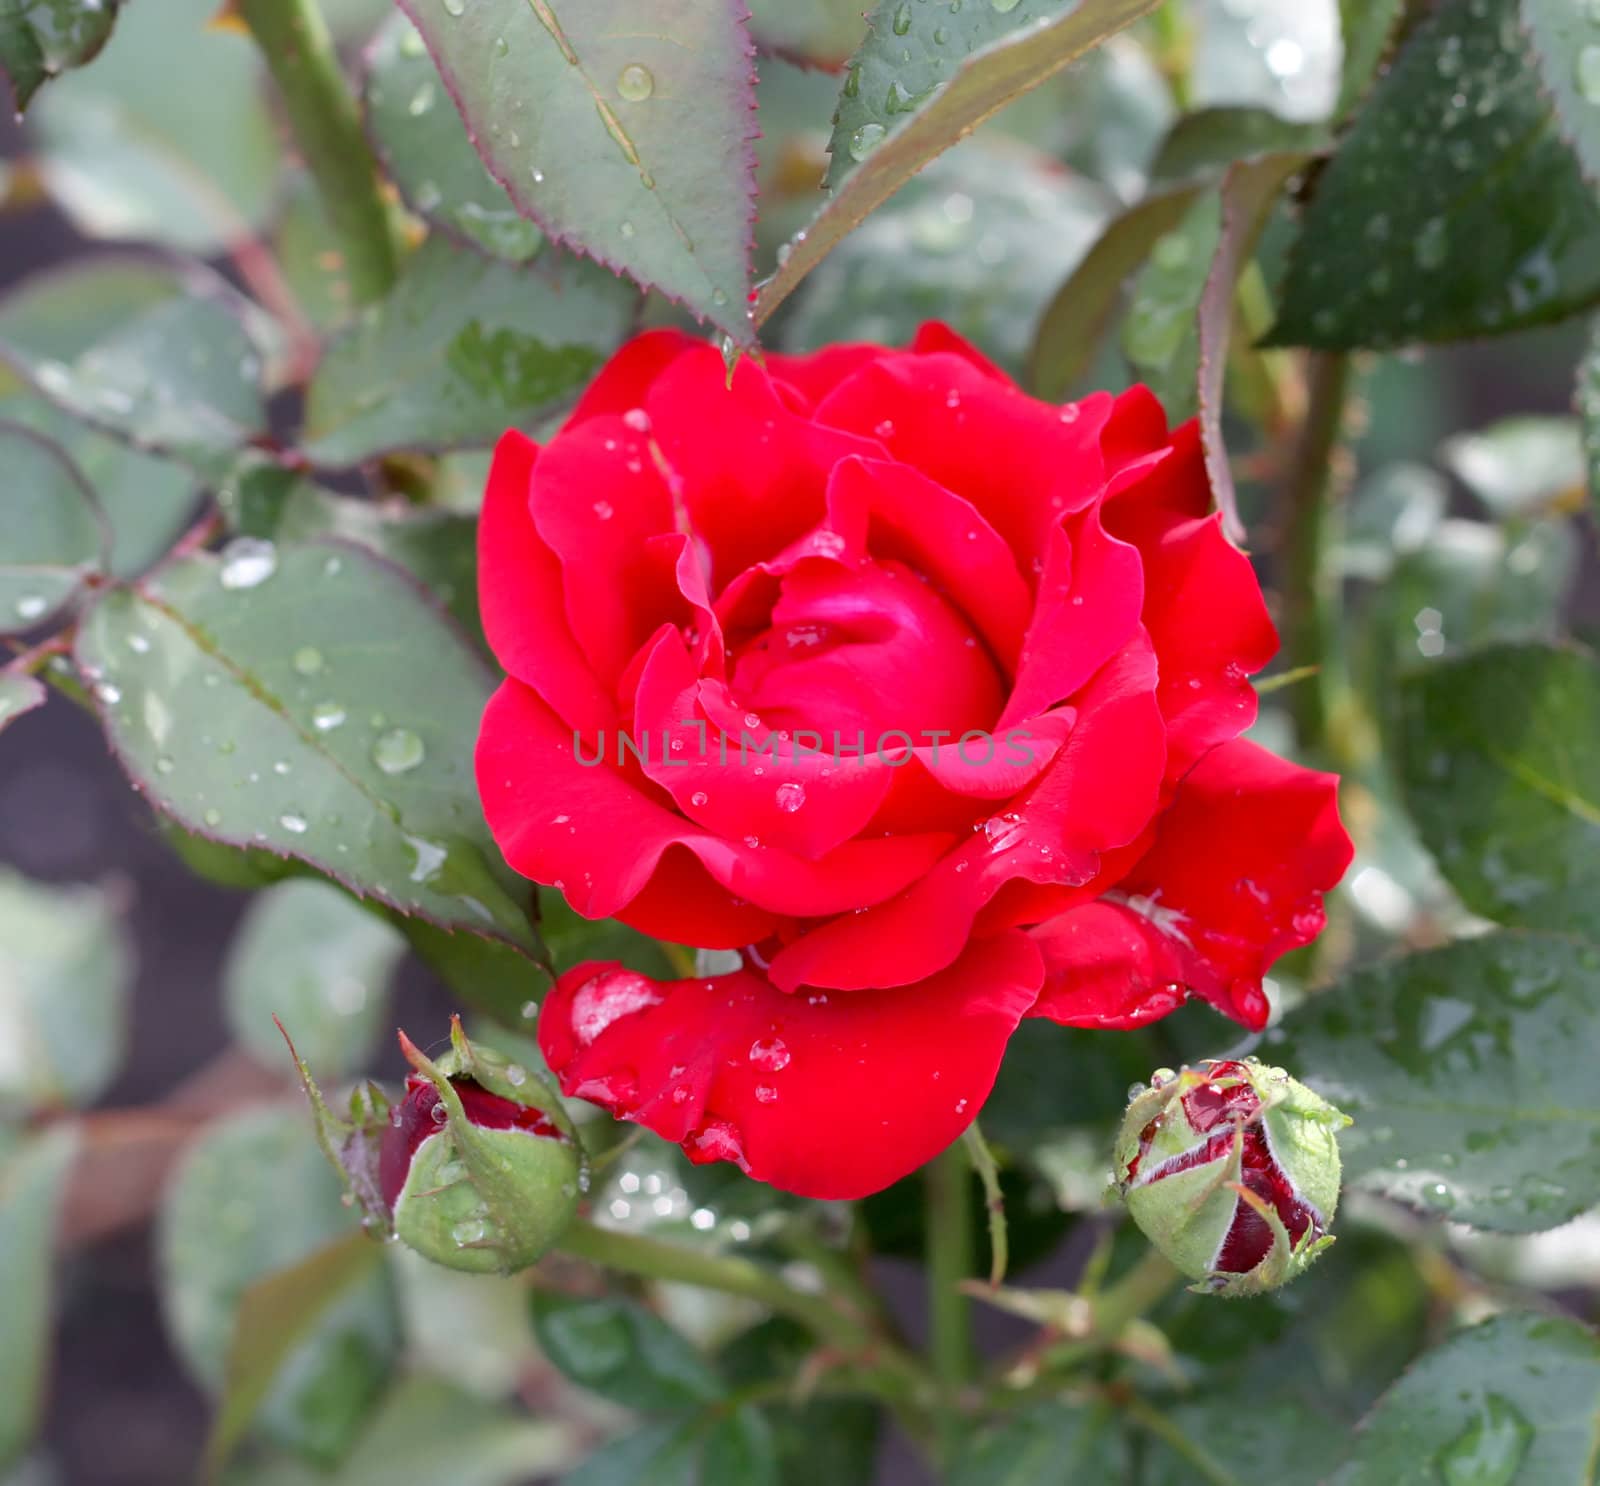 Red rose. After rain. by sergpet